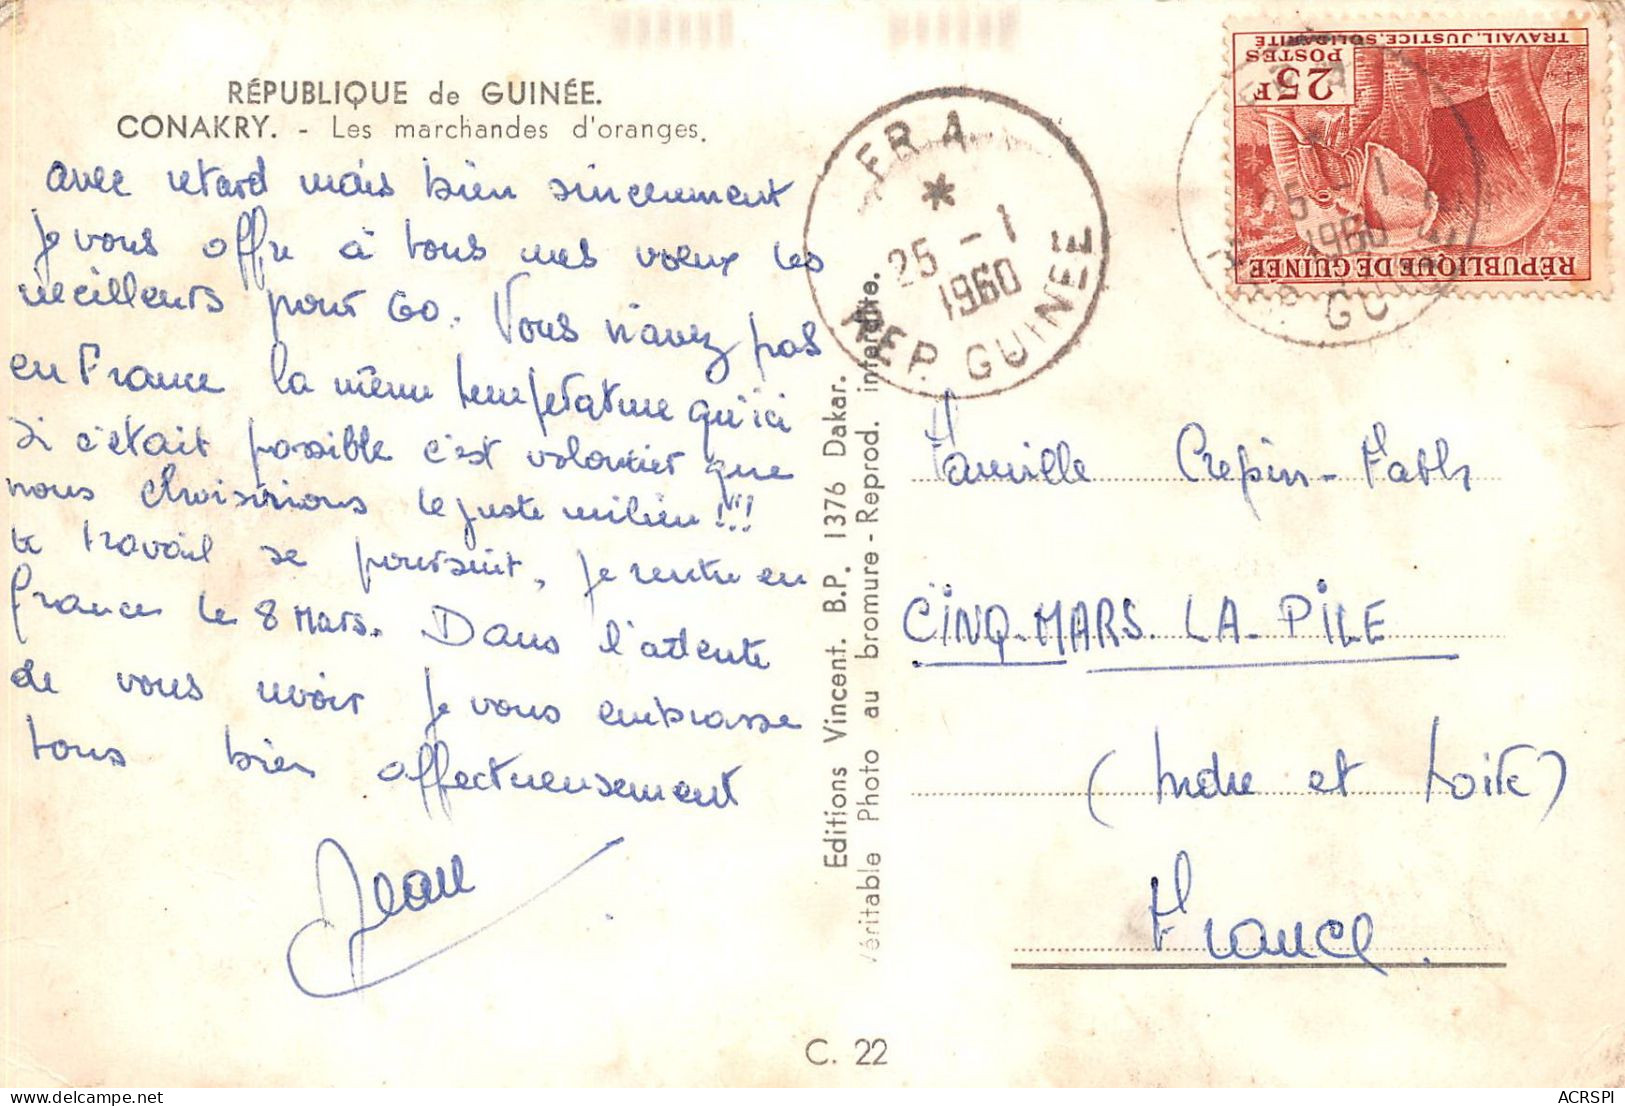 GUINEE Francaise Conakry Marchandes D'oranges OO 0950 - Französisch-Guinea